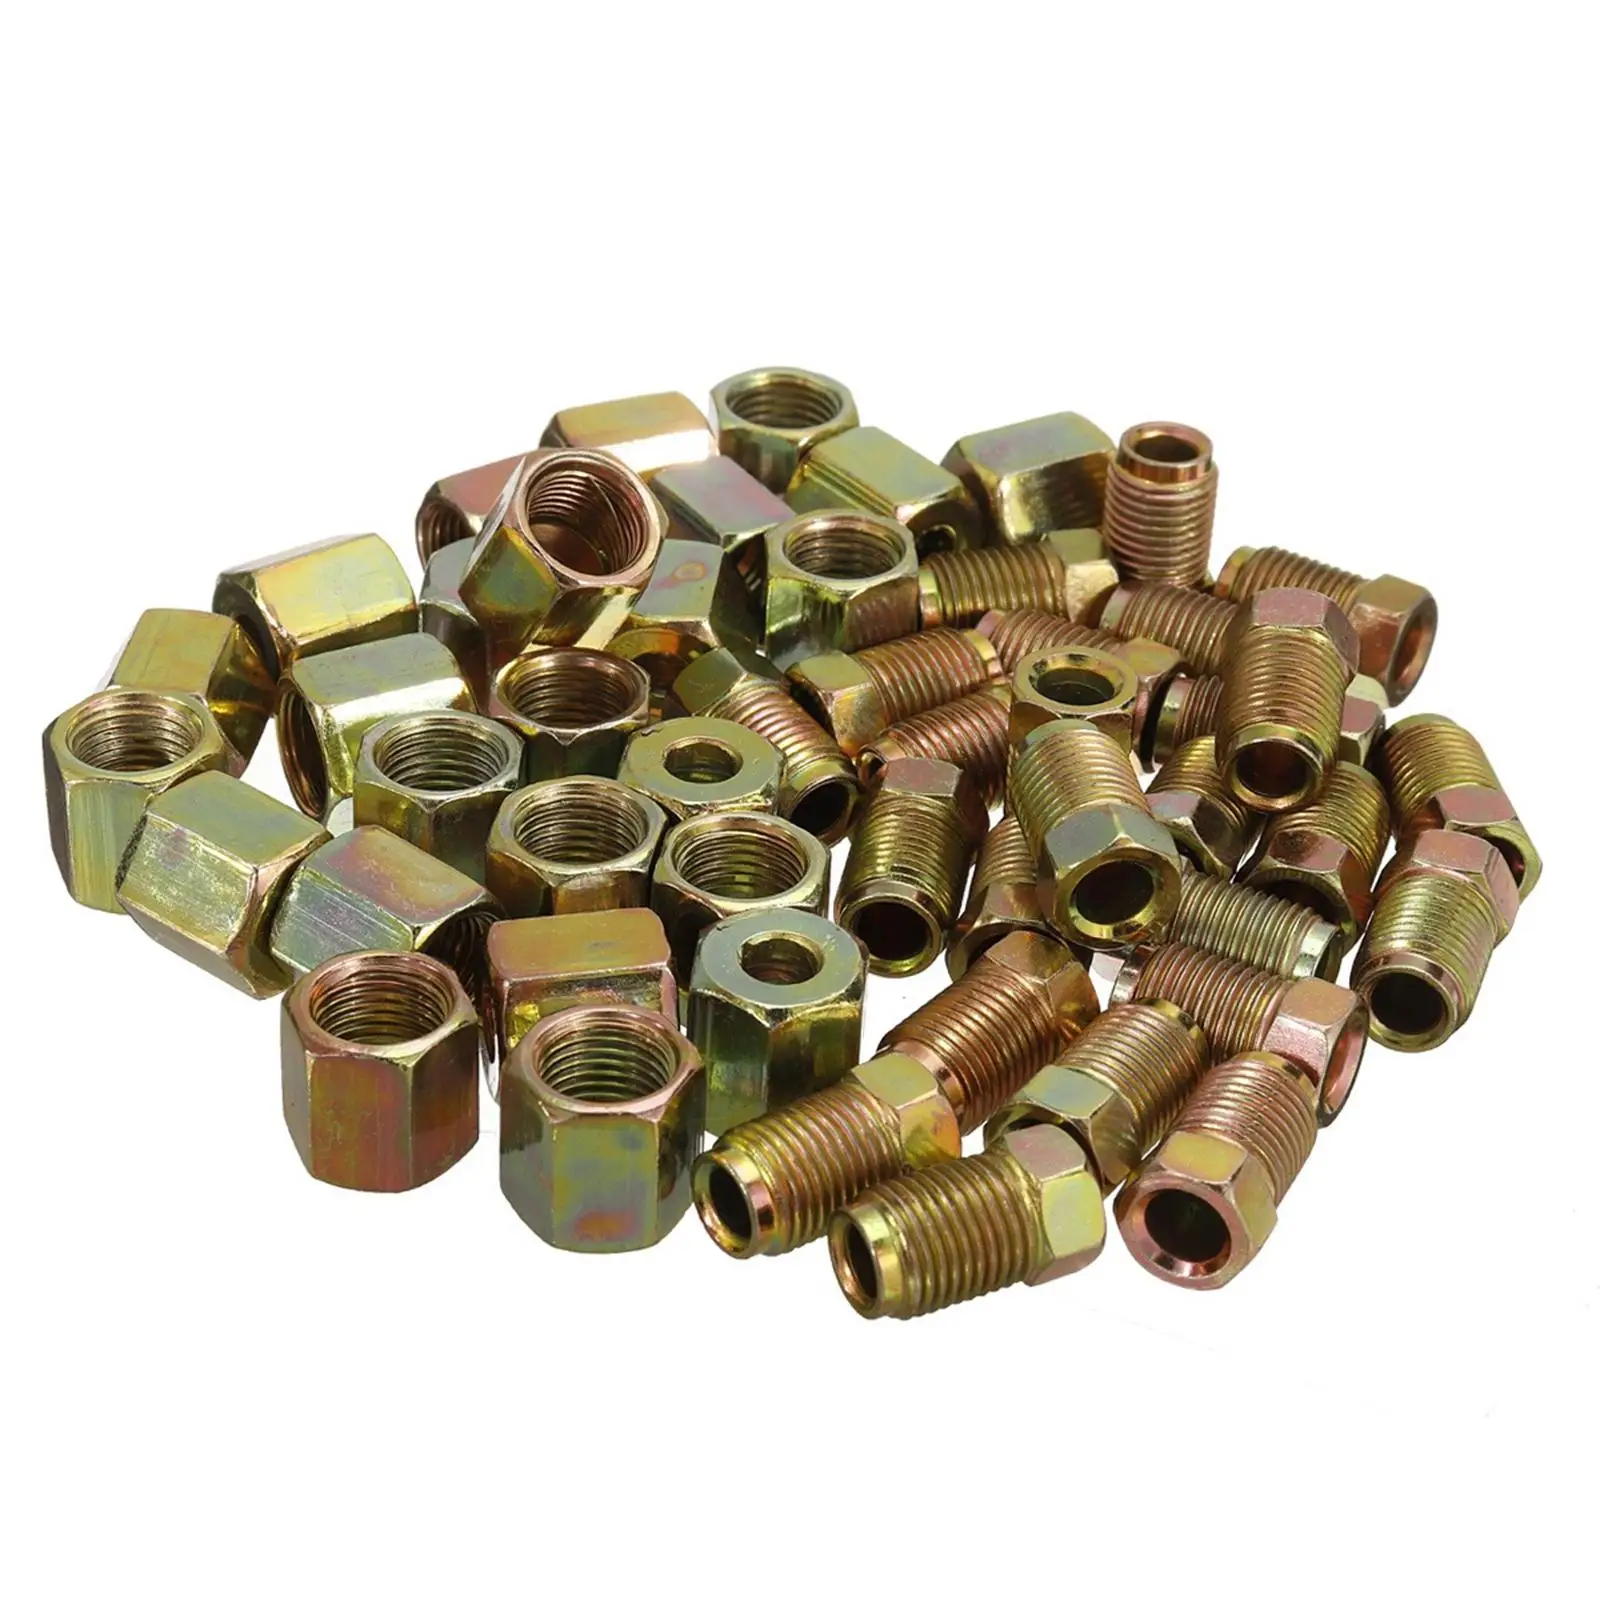 50Pcs Brake Pipe Fittings Adapter 10x1mm Male & Female Metric Nuts for 3/16 inch Brake Line Tube Replacement Accs